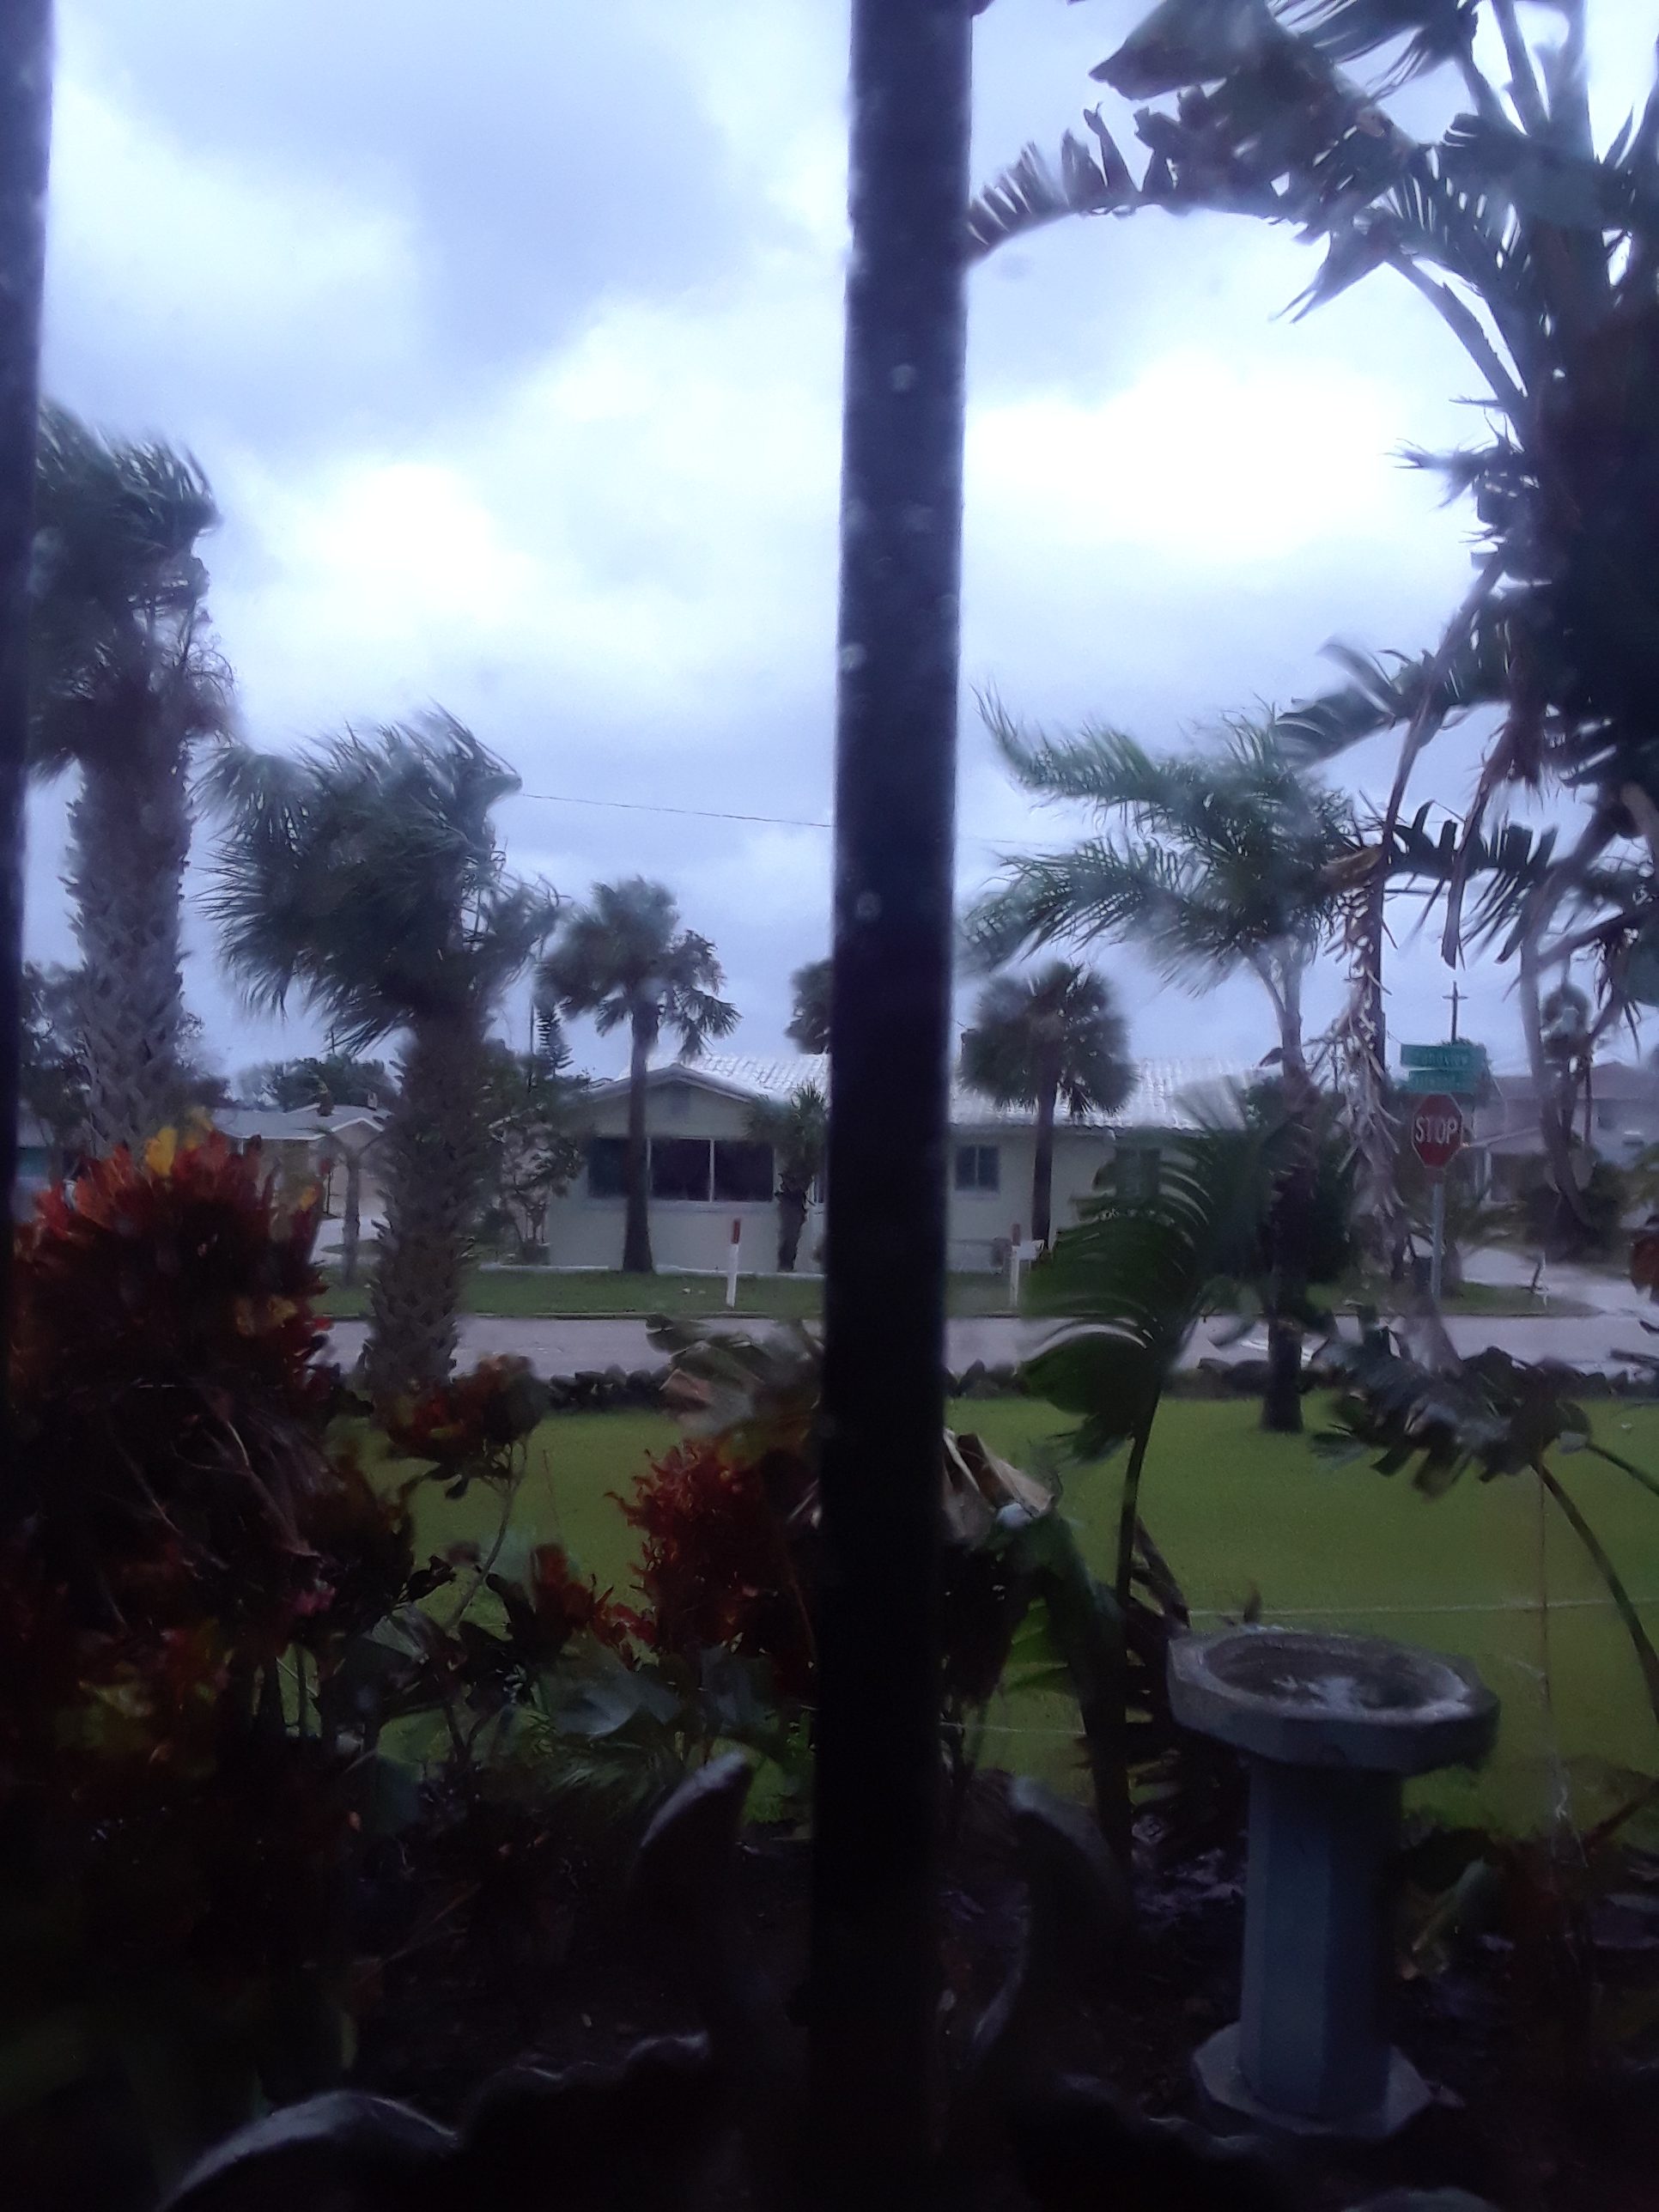 View out window of wind blowing palm trees and rain during a hurricane.